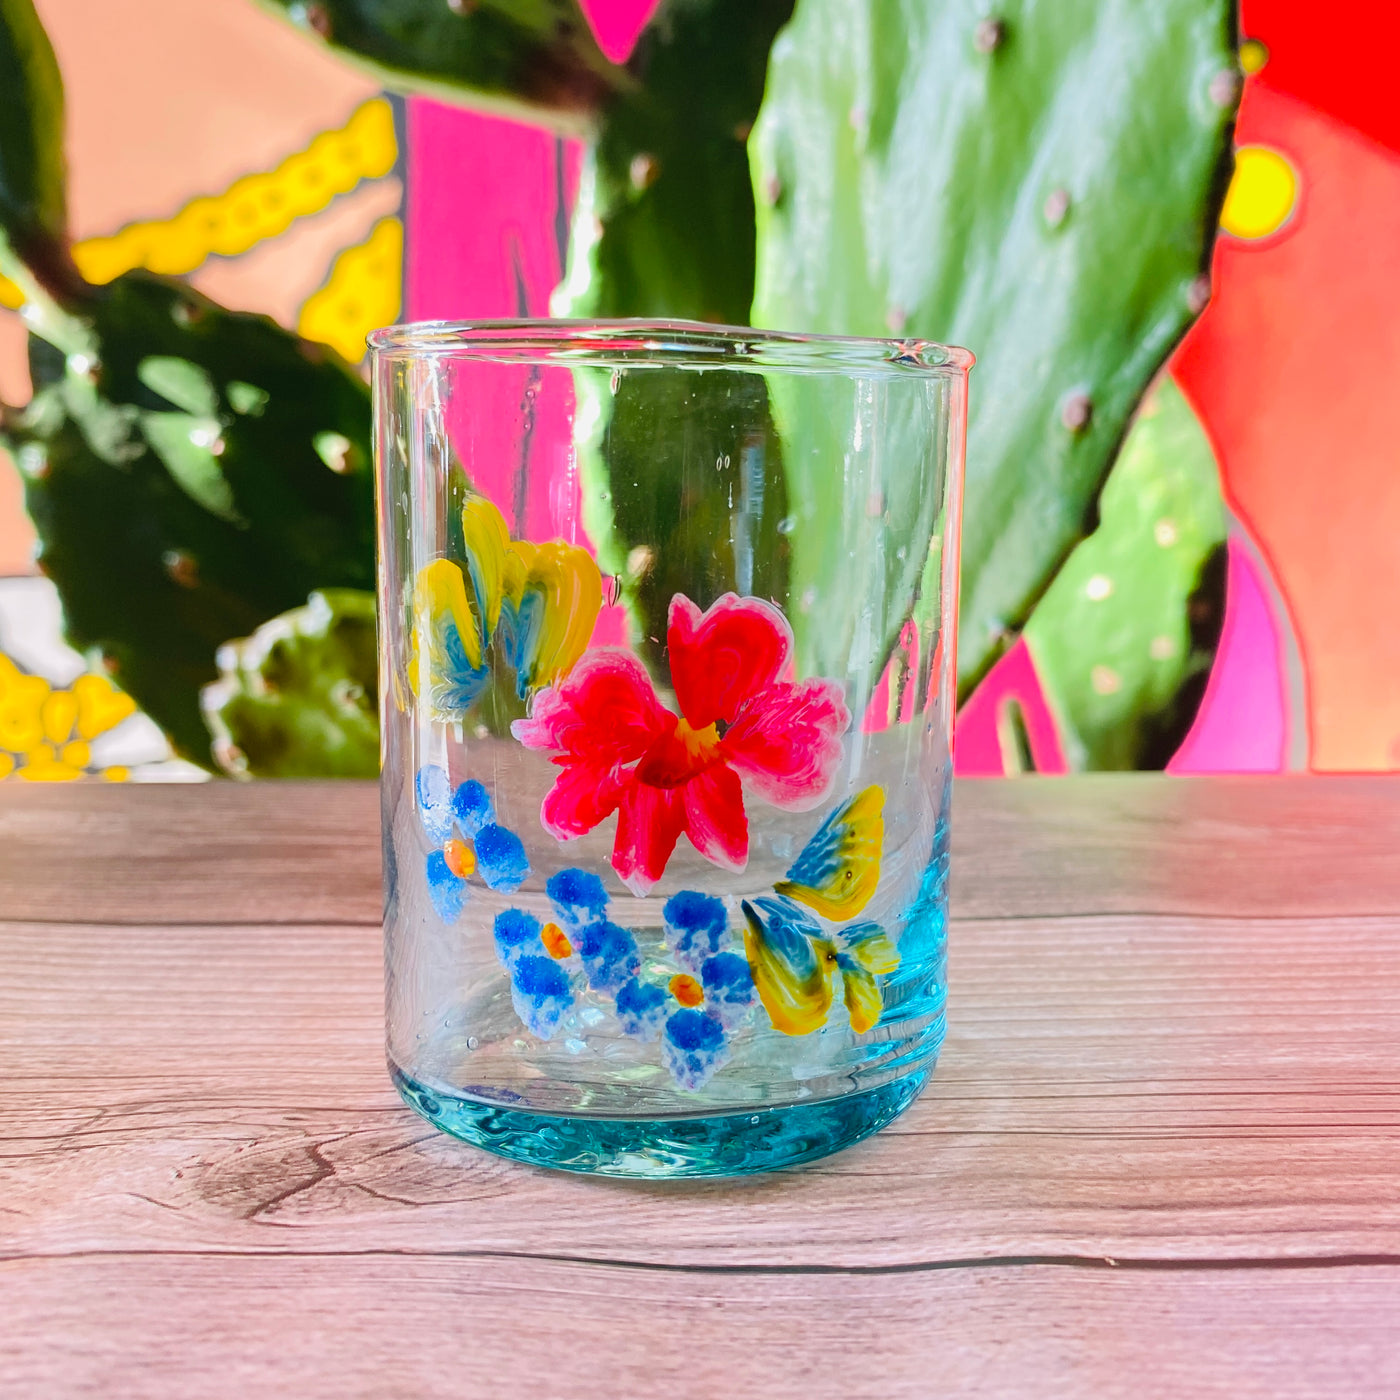 Hand-painted flower glass pictured on top of wooden table with cactus in the background.